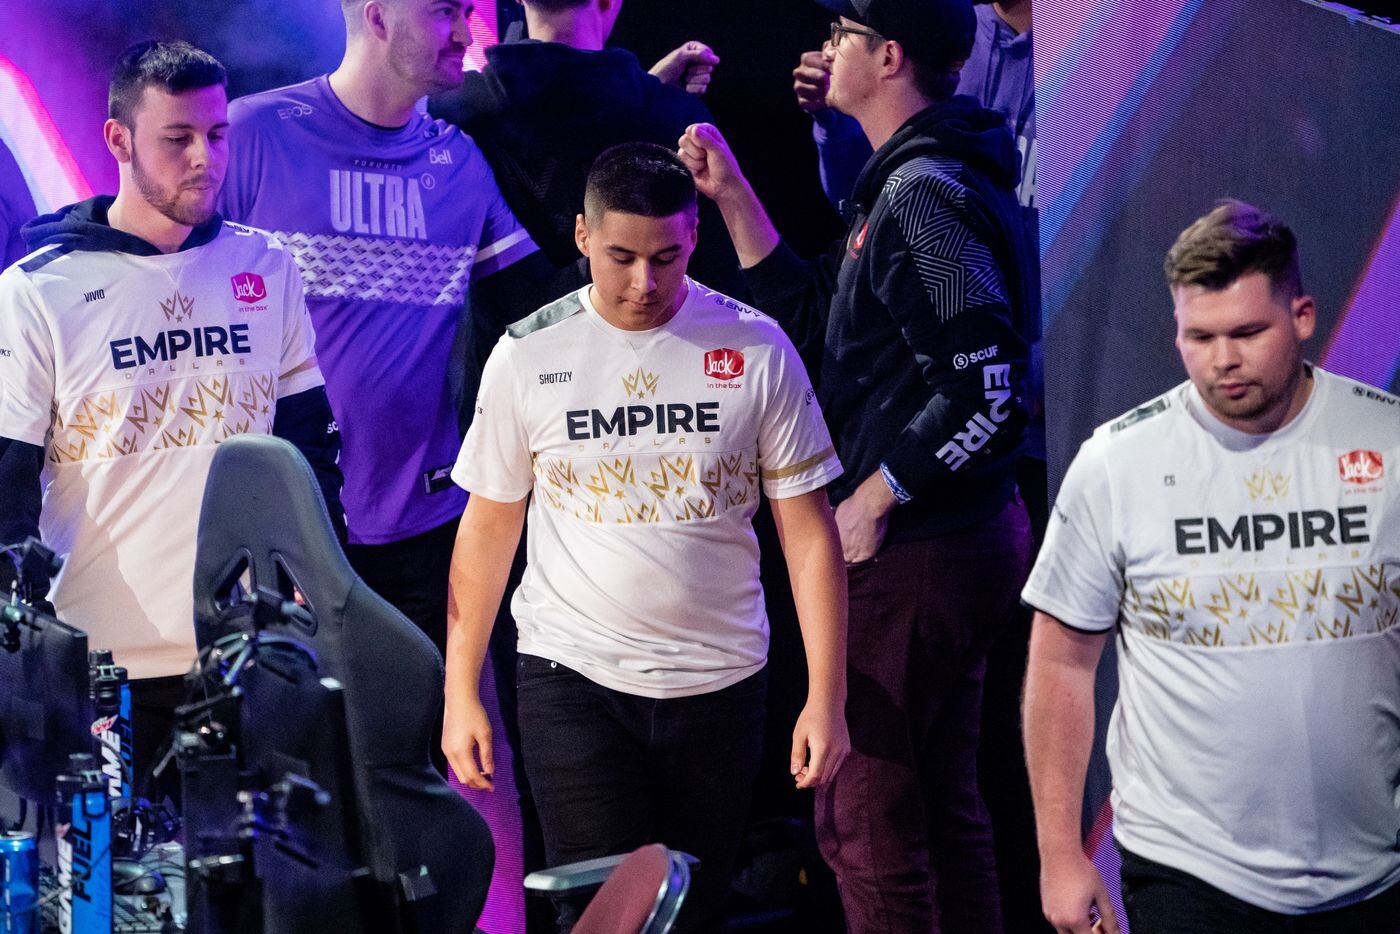 From left, Reece “Vivid” Drost, Anthony “Shotzzy” Cuevas-Castro, and Ian “C6” Porter react to the Dallas Empires elimination from the  Call of Duty league playoffs at the Galen Center on Saturday, August 21, 2021 in Los Angeles, California. The Empire lost to Toronto Ultra 2 - 3, eliminating them from the tournament. (Justin L. Stewart/Special Contributor)